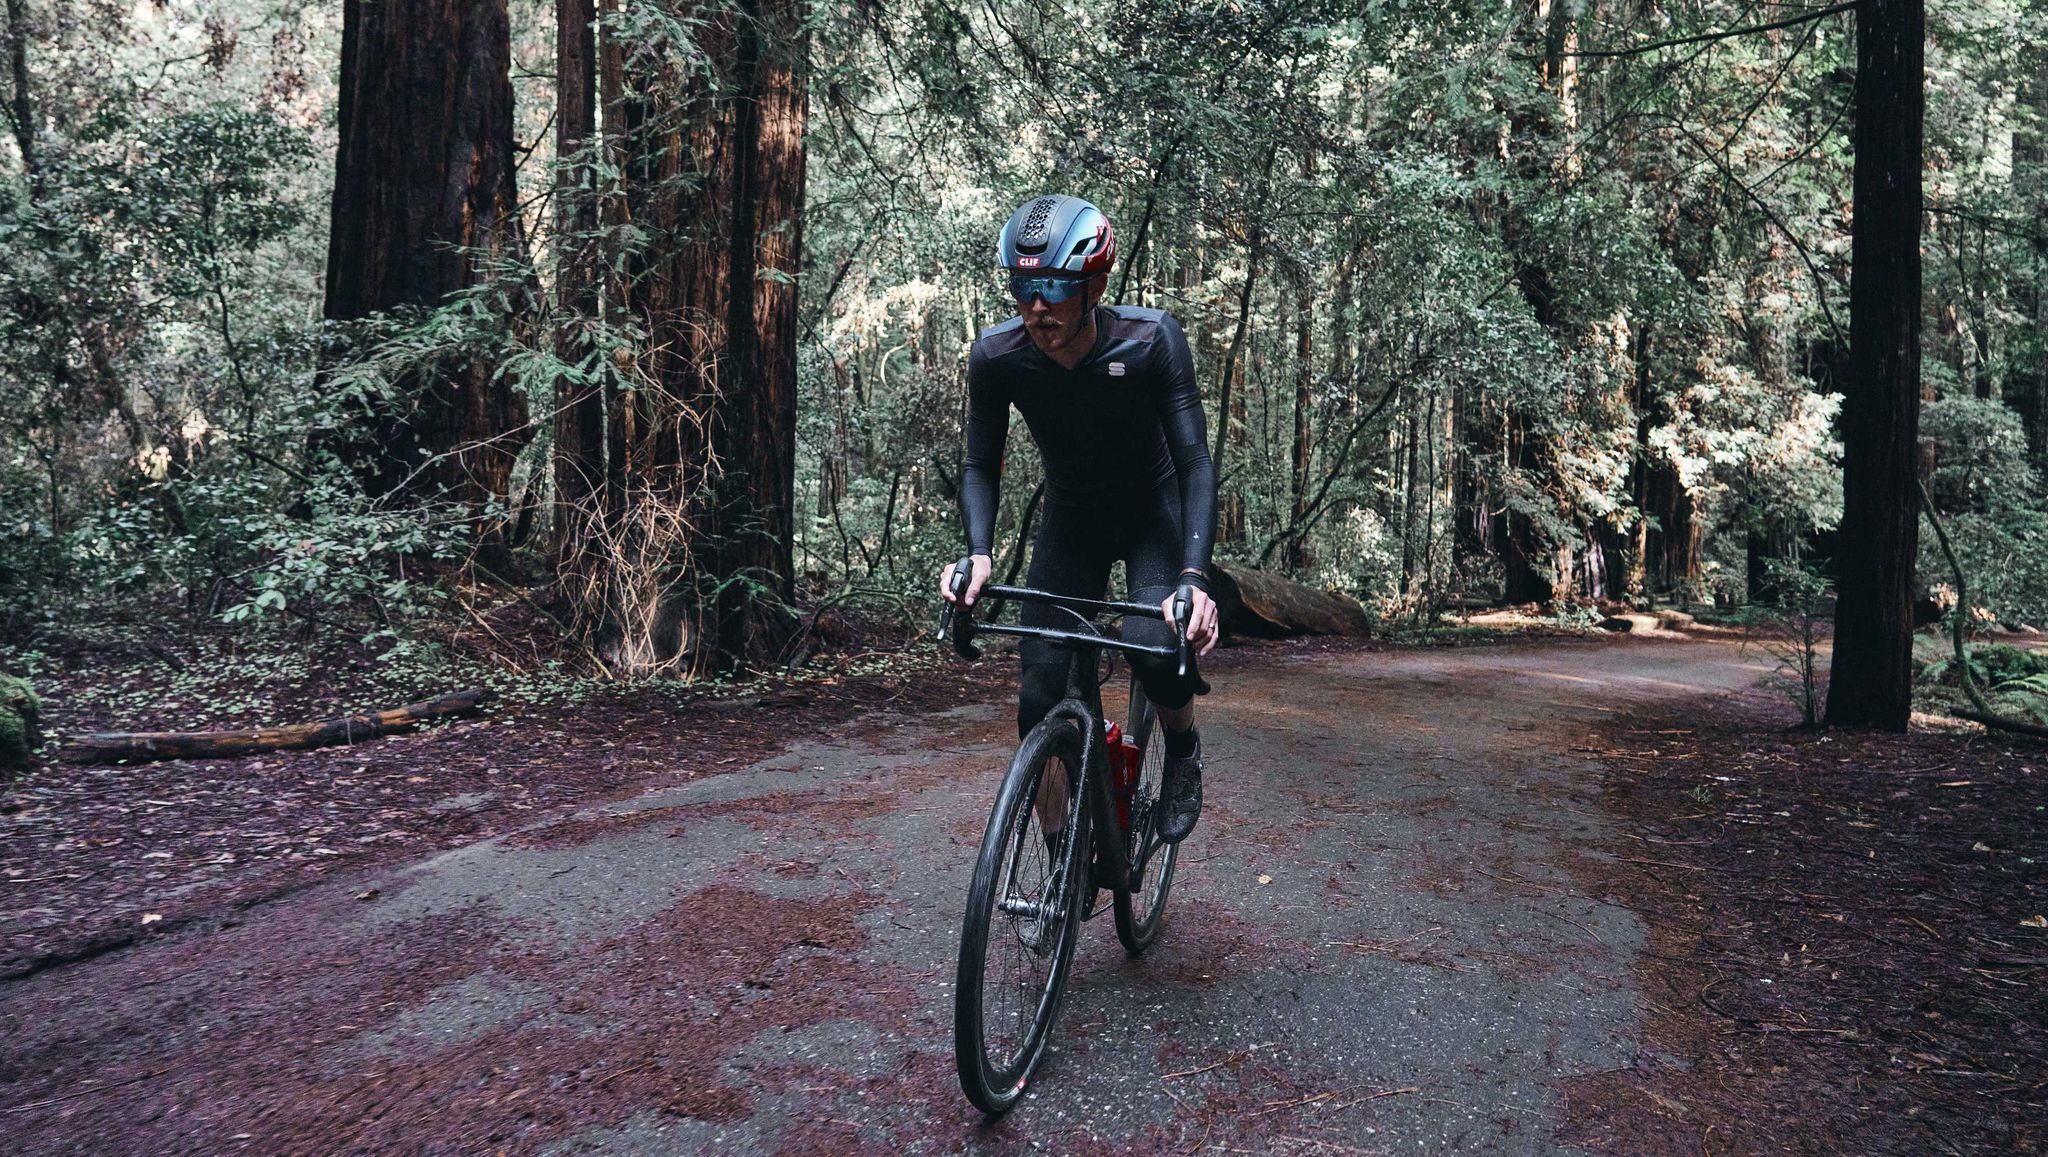 peter stetina training on singletrack in sonoma county, ca in january 2020